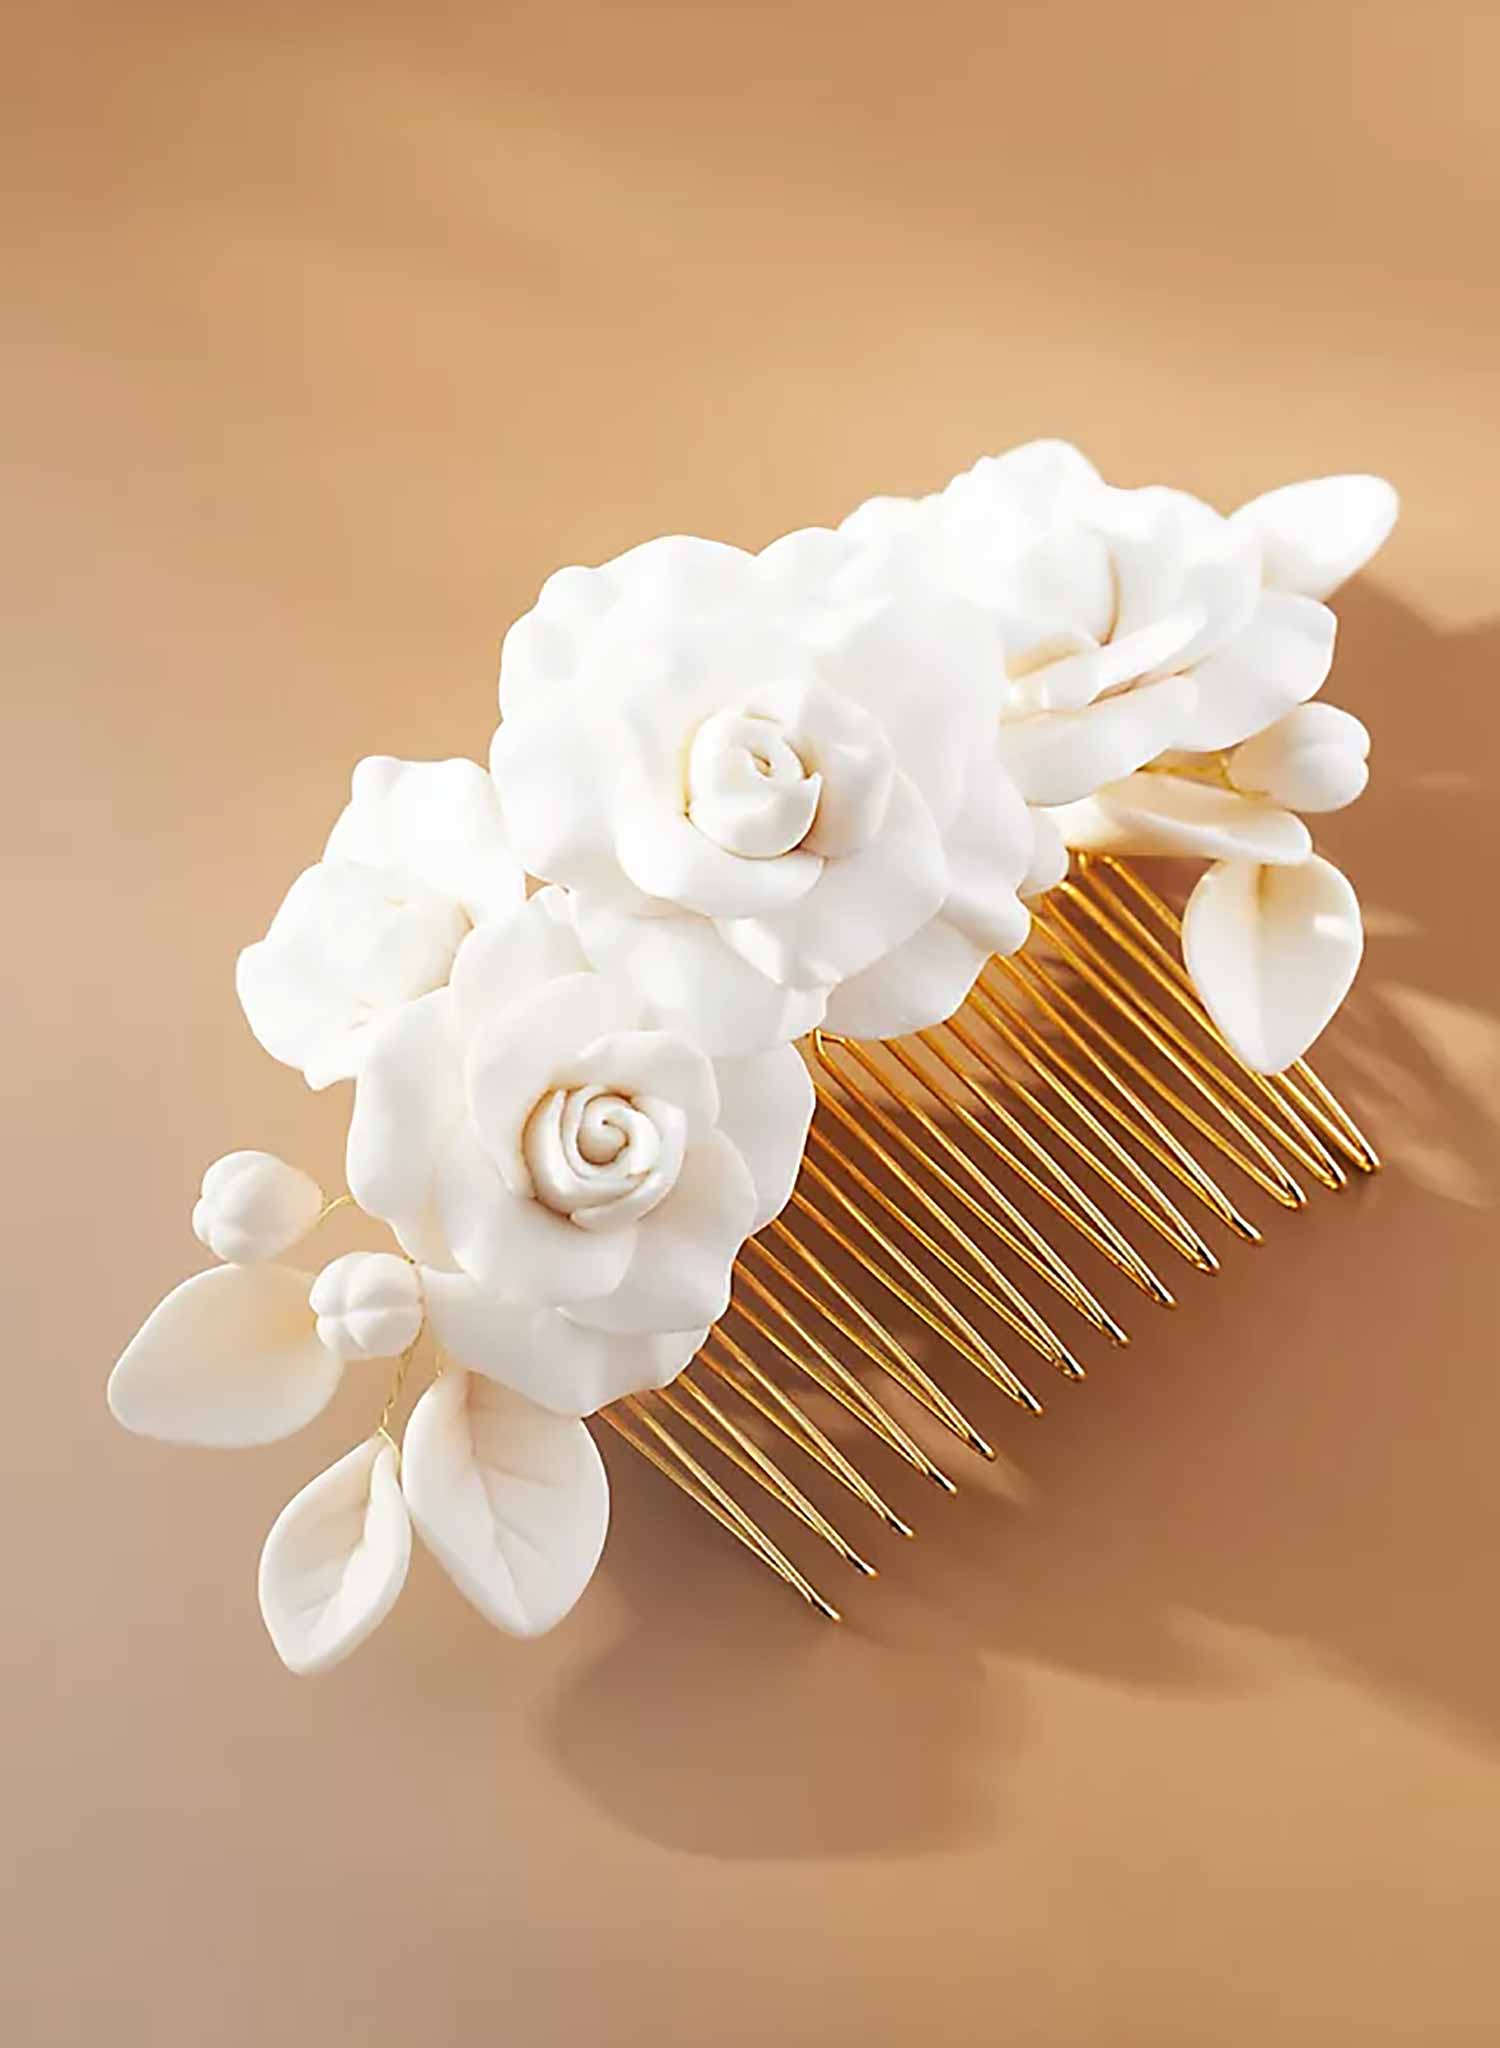 Triple clay rose bridal hair comb - Style #2394